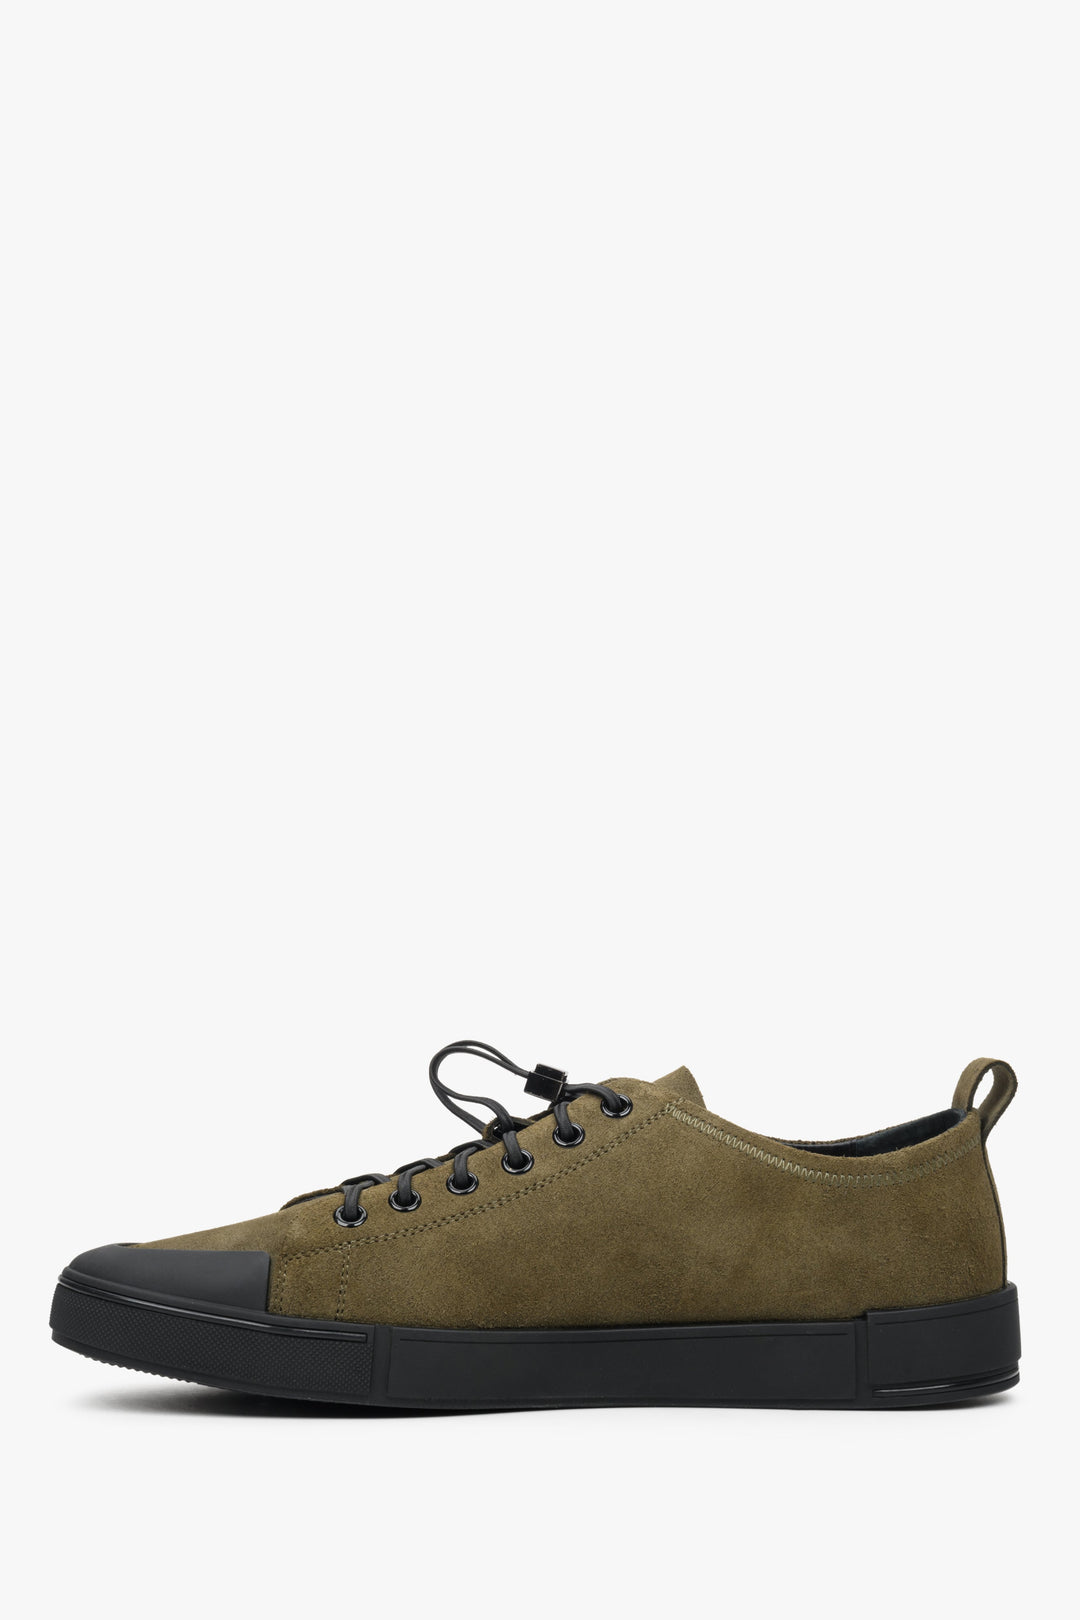 Green men's sneakers made of genuine leather by Estro - shoe profile for fall.